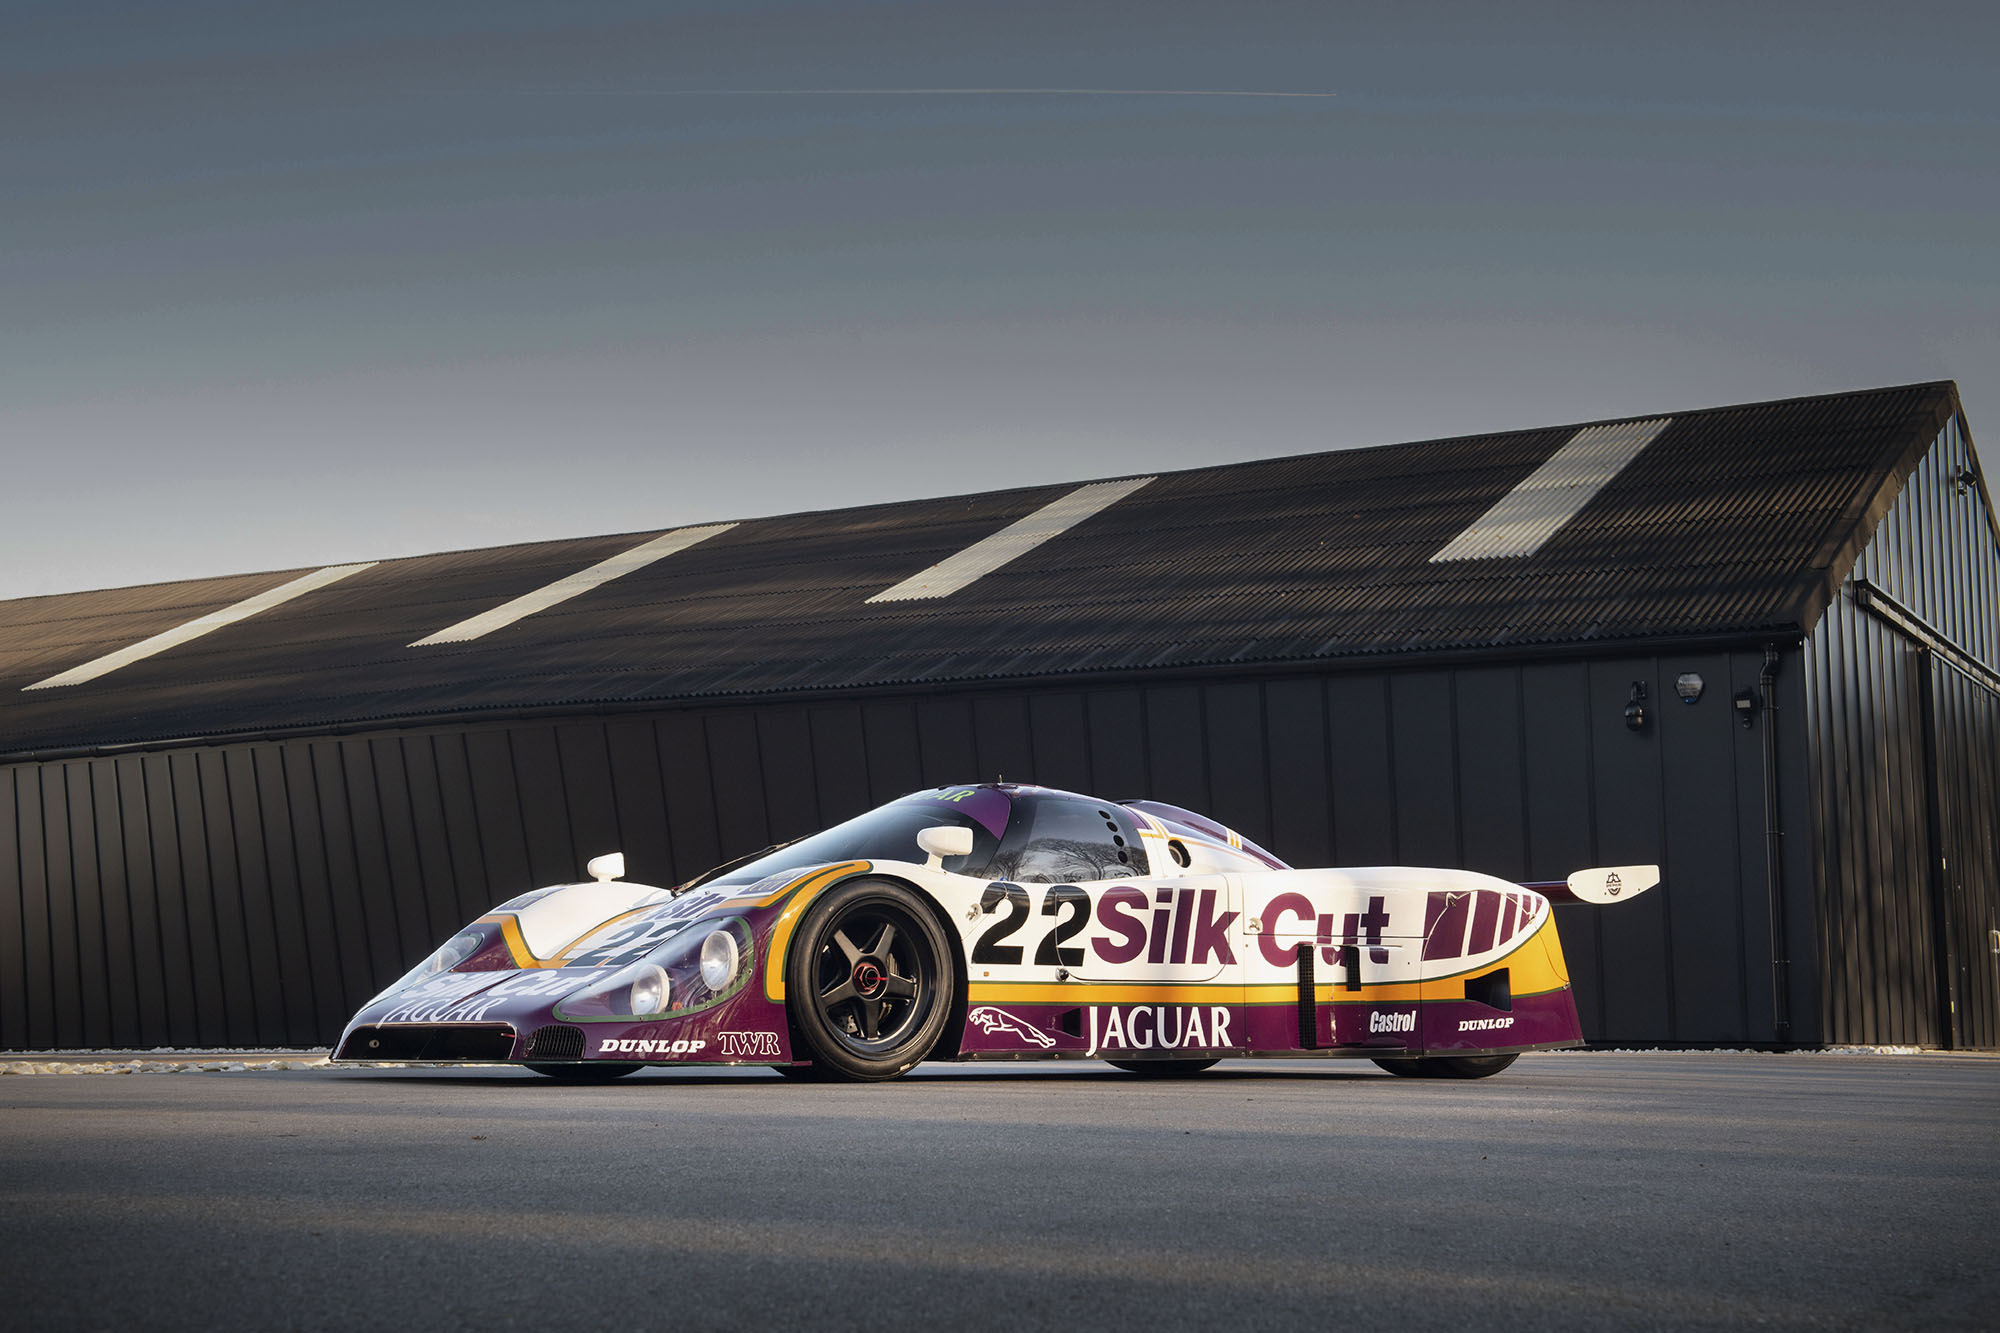 1986 Jaguar XJR-9LM - veteran of three Le Mans 24hrs and the most 